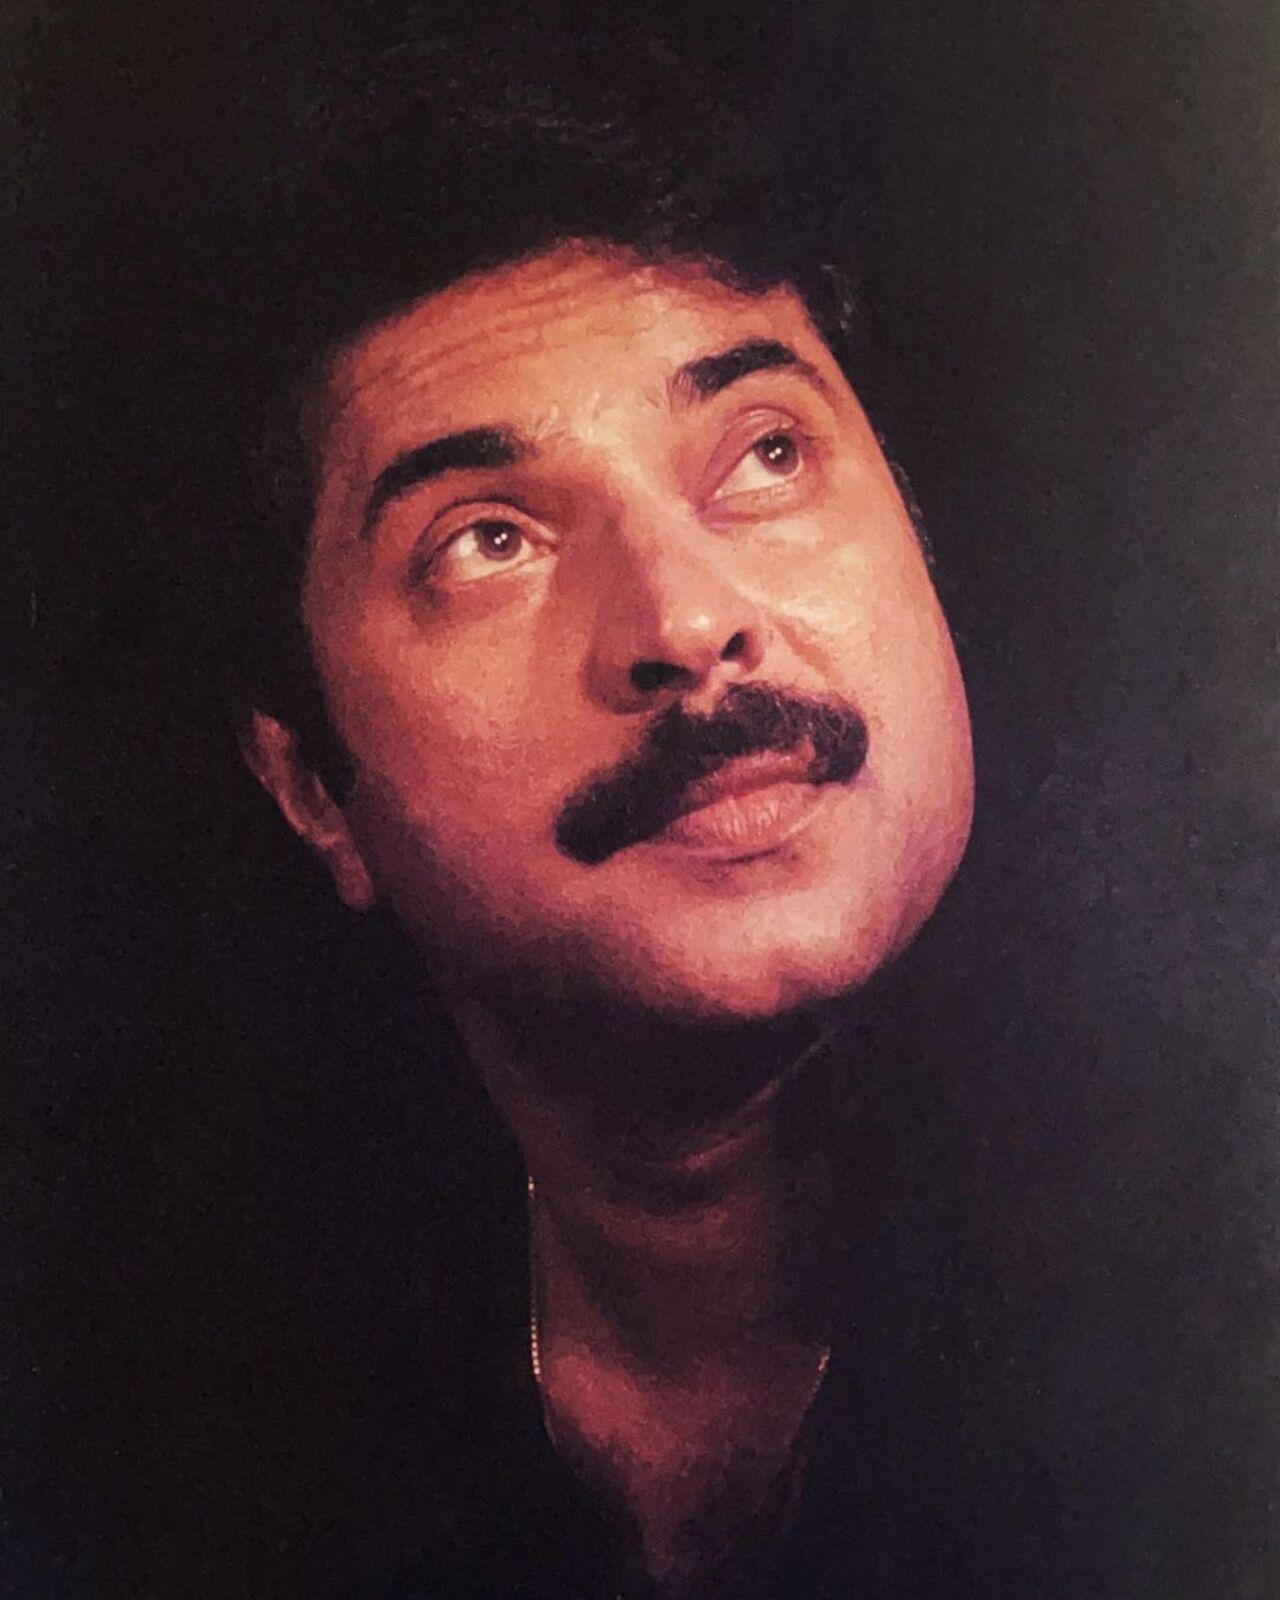 Mammootty made his film debut in the year 1971 with the film 'Anubhavangal Paalichakal'